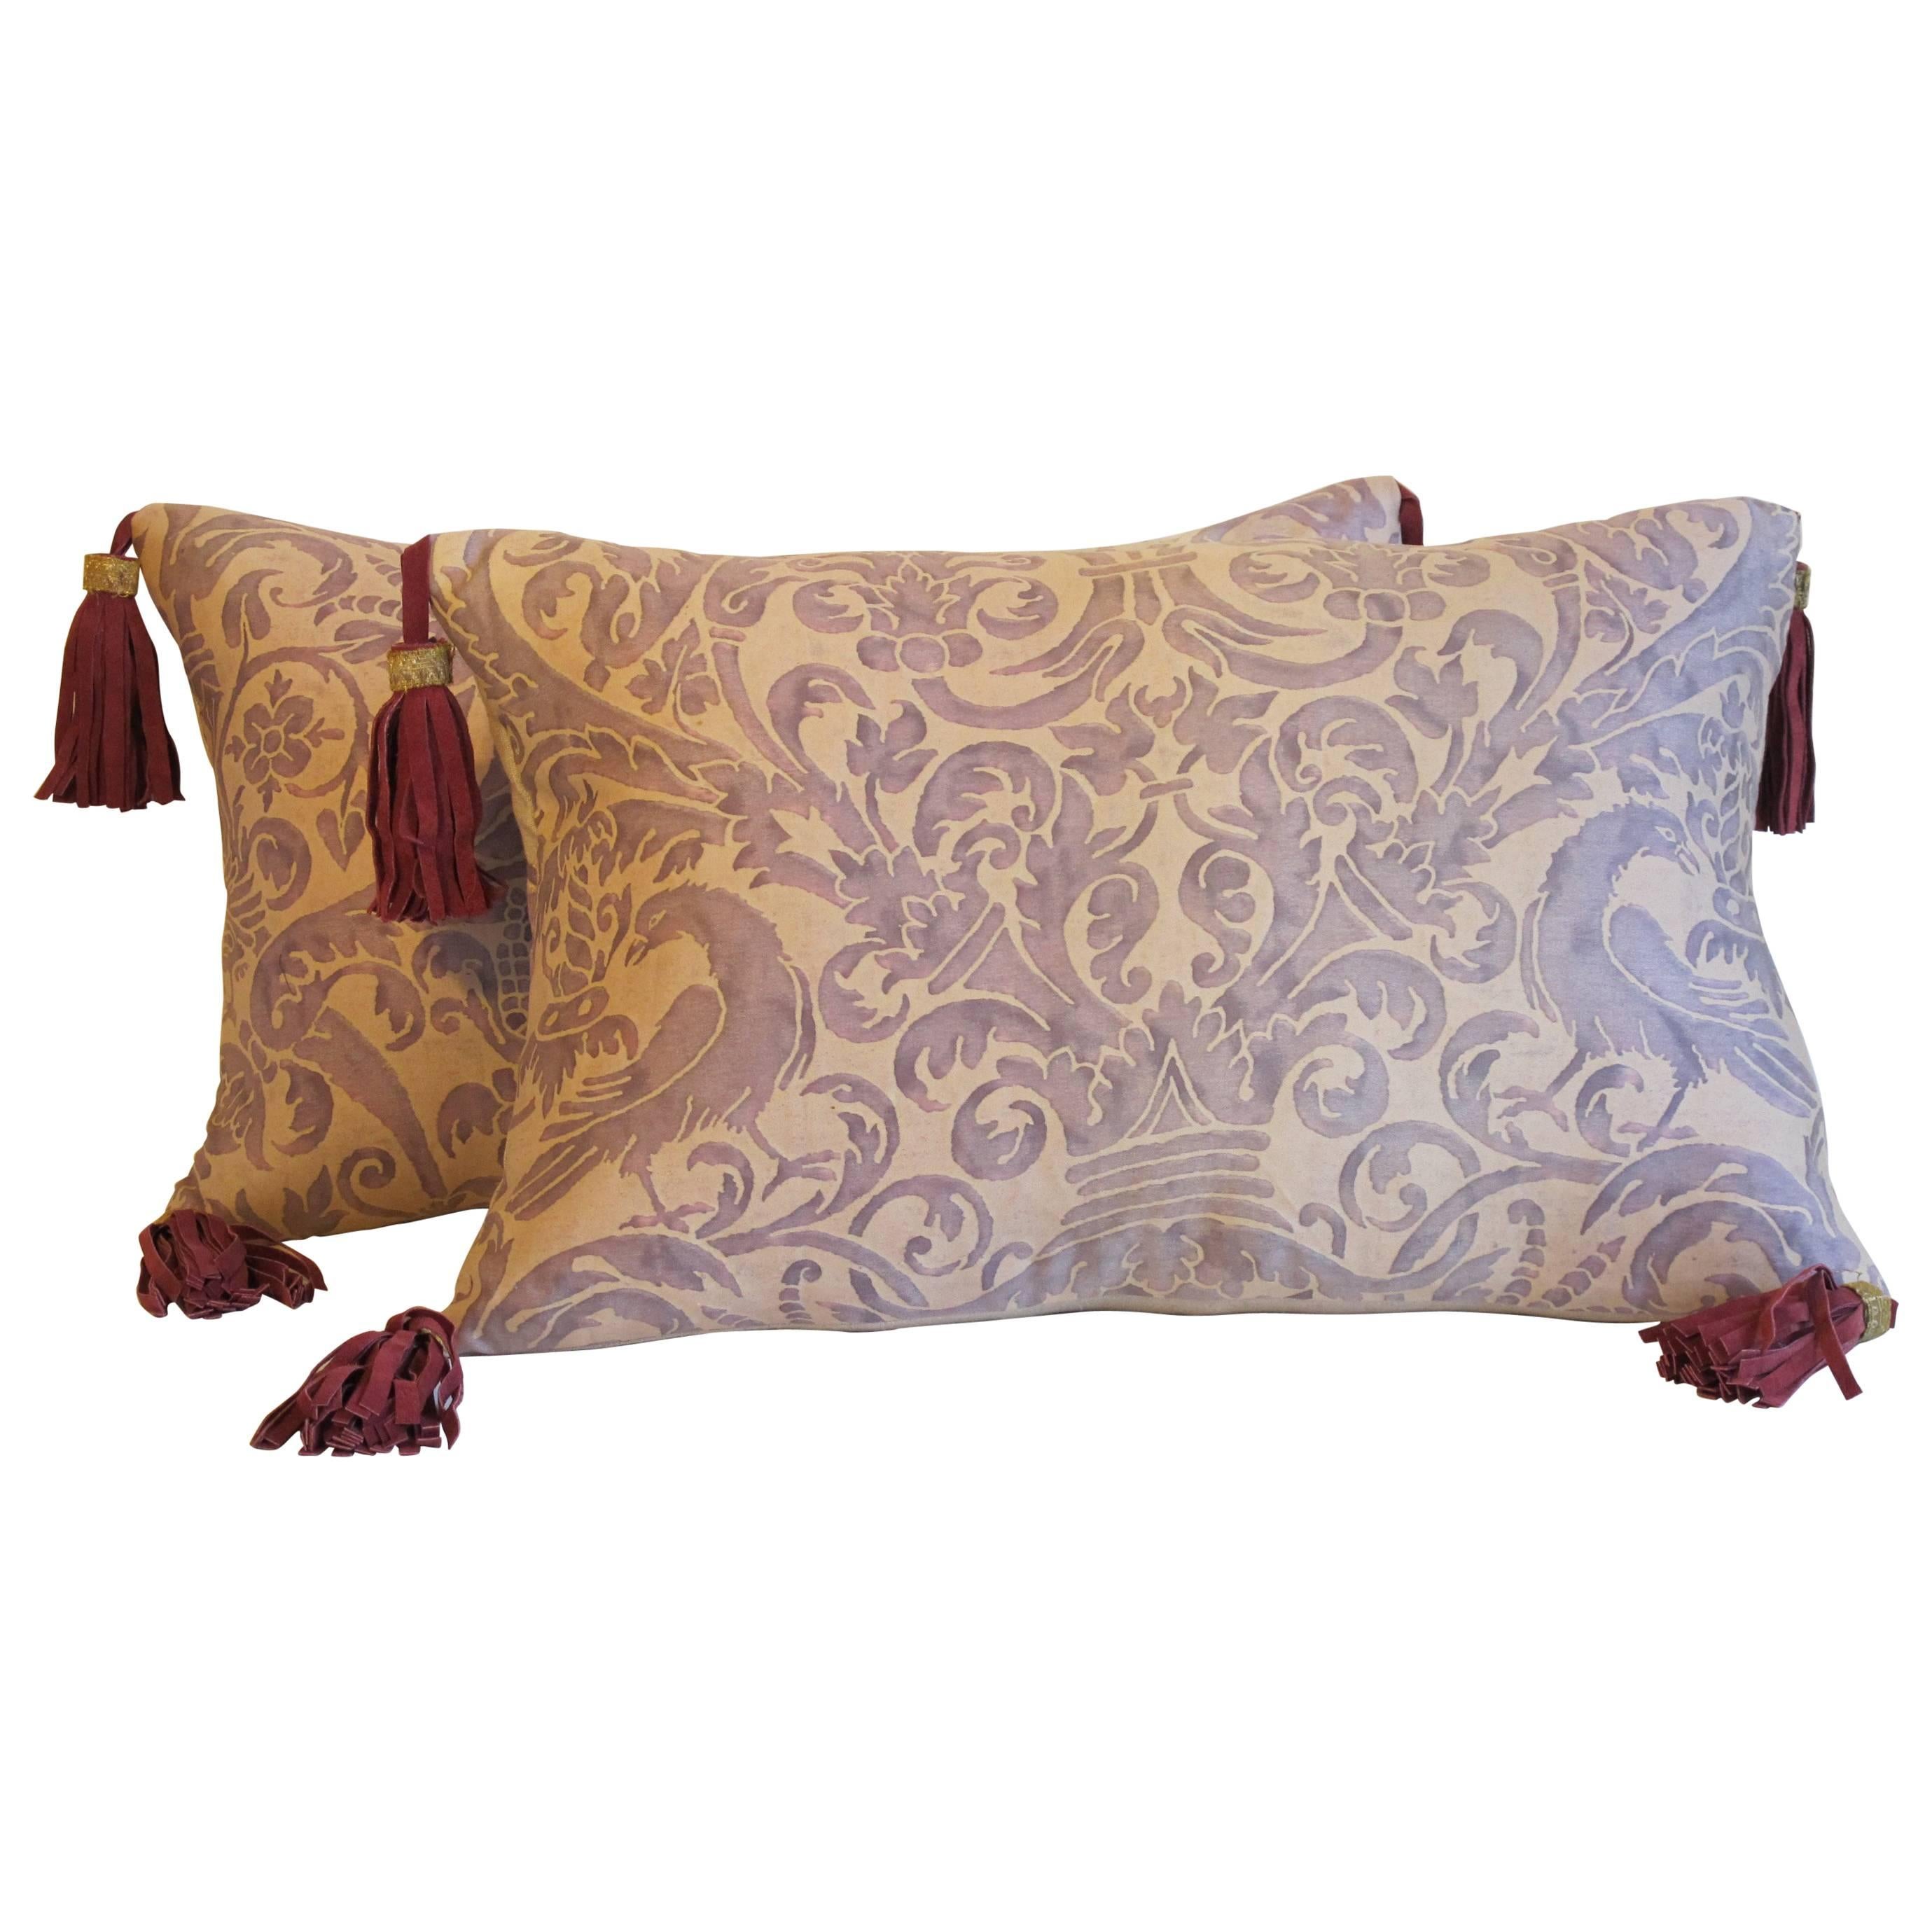 Vintage Fortuny Pillows by Mary Jane McCarty